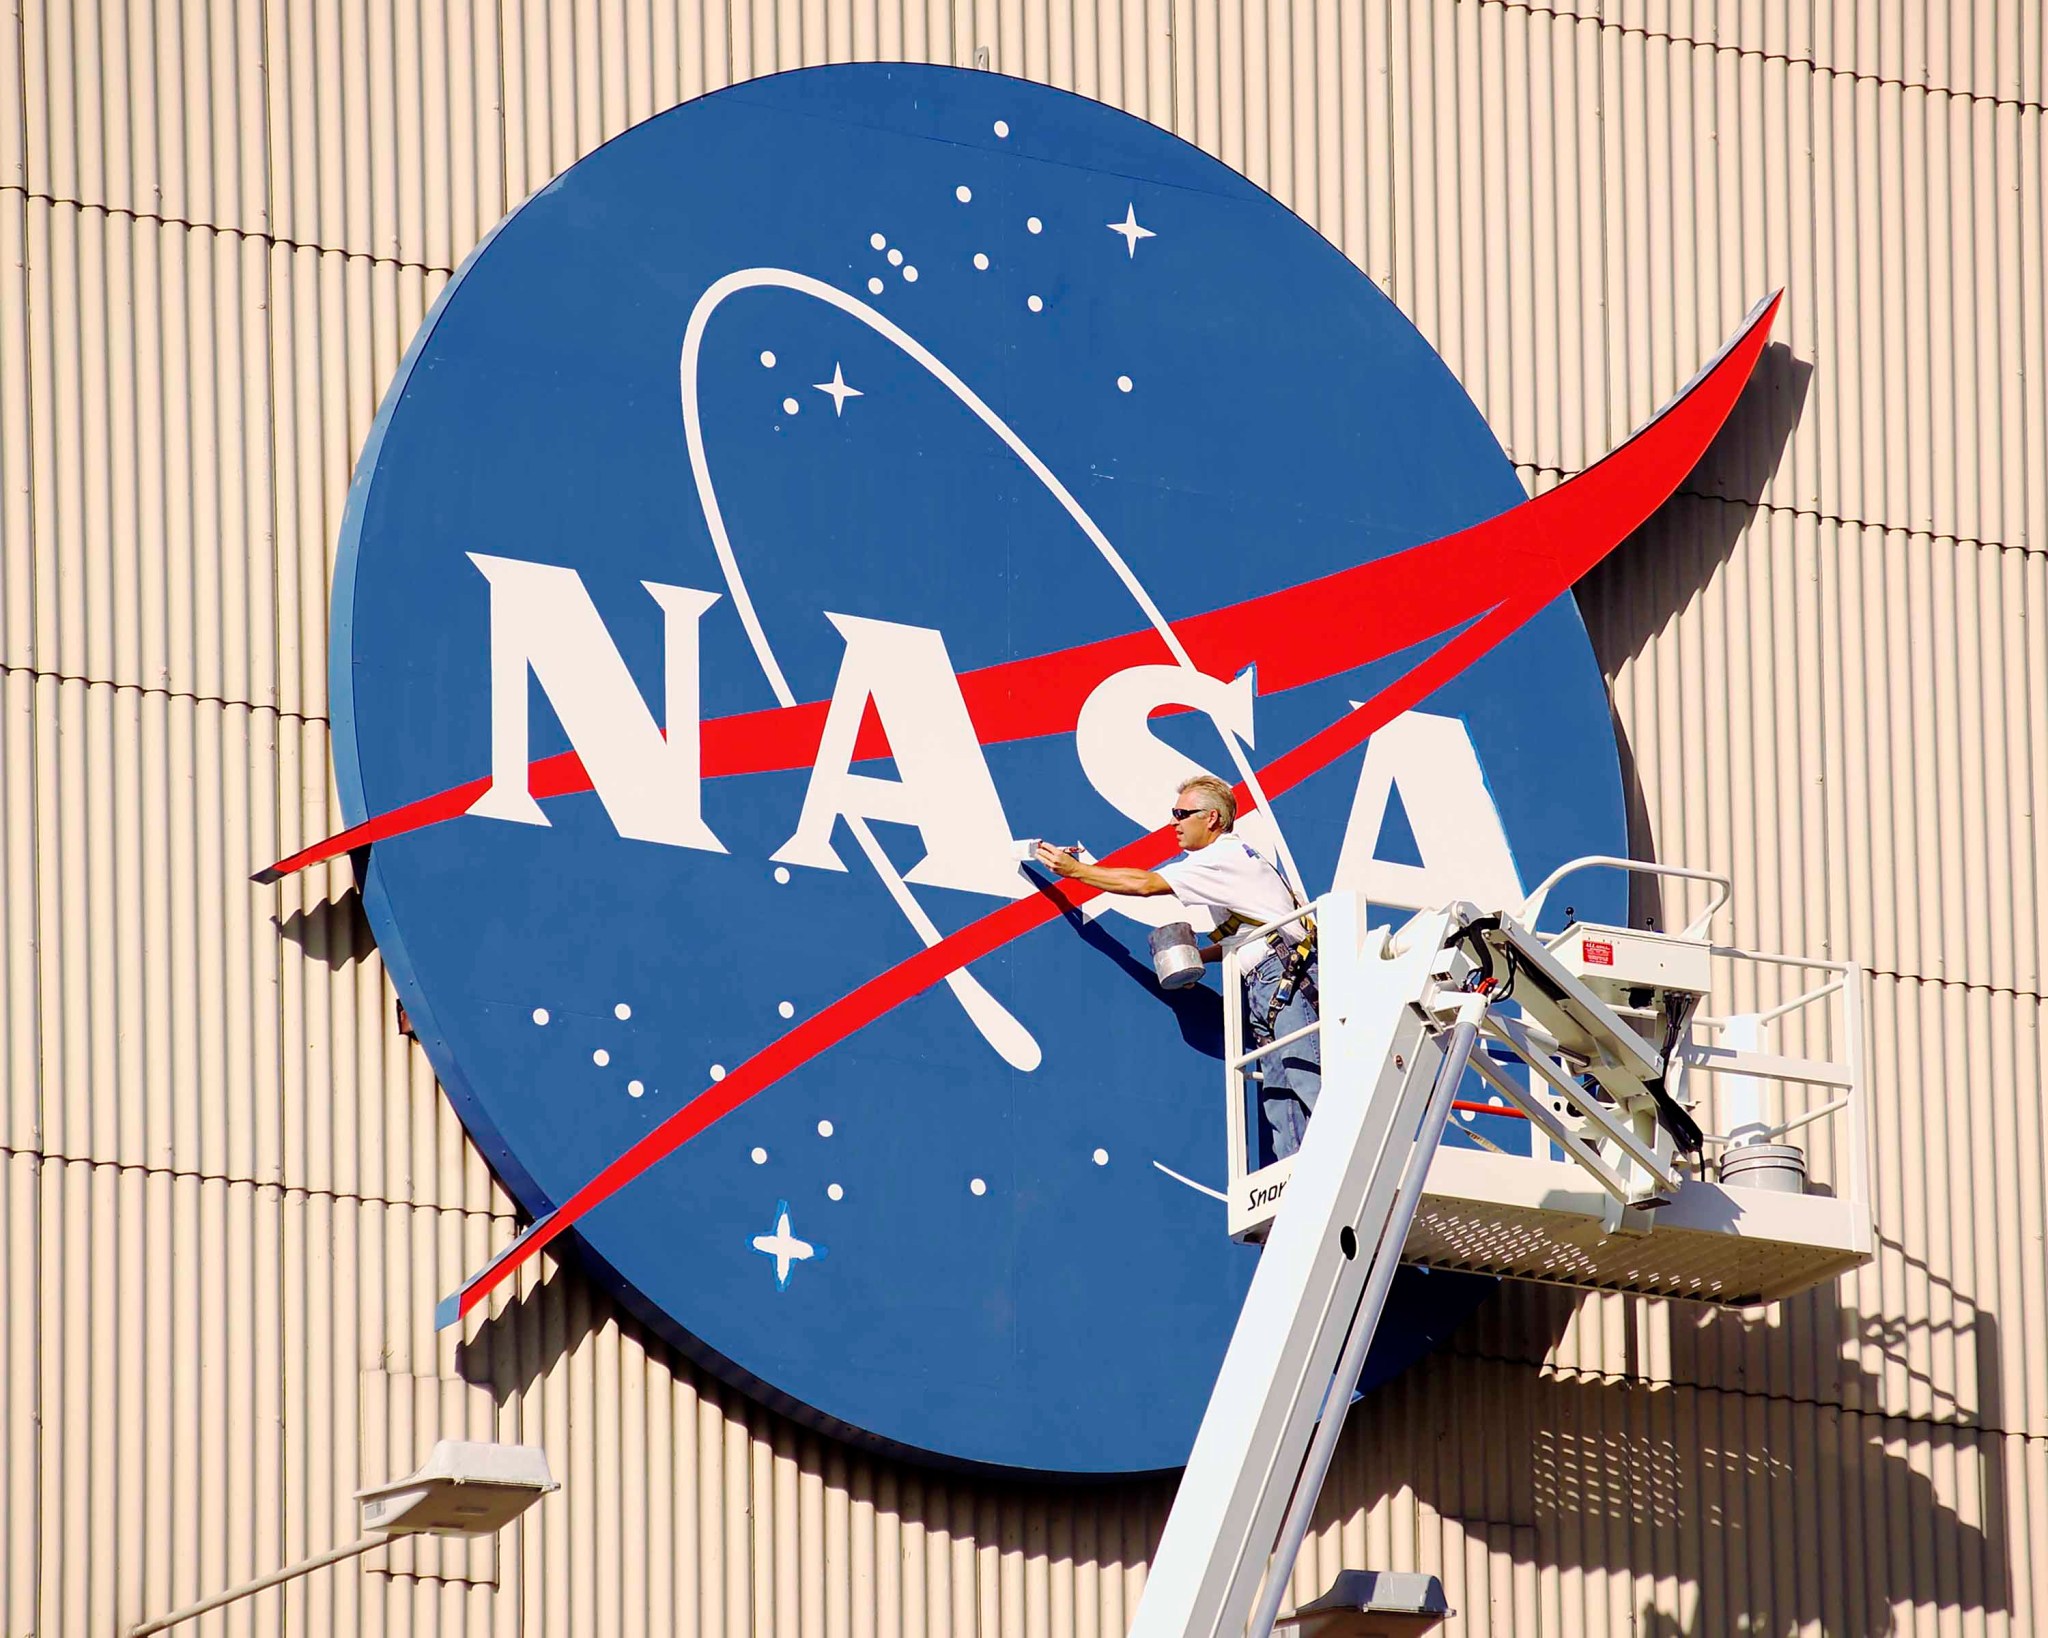 A worker applies fresh paint to the NASA logo.